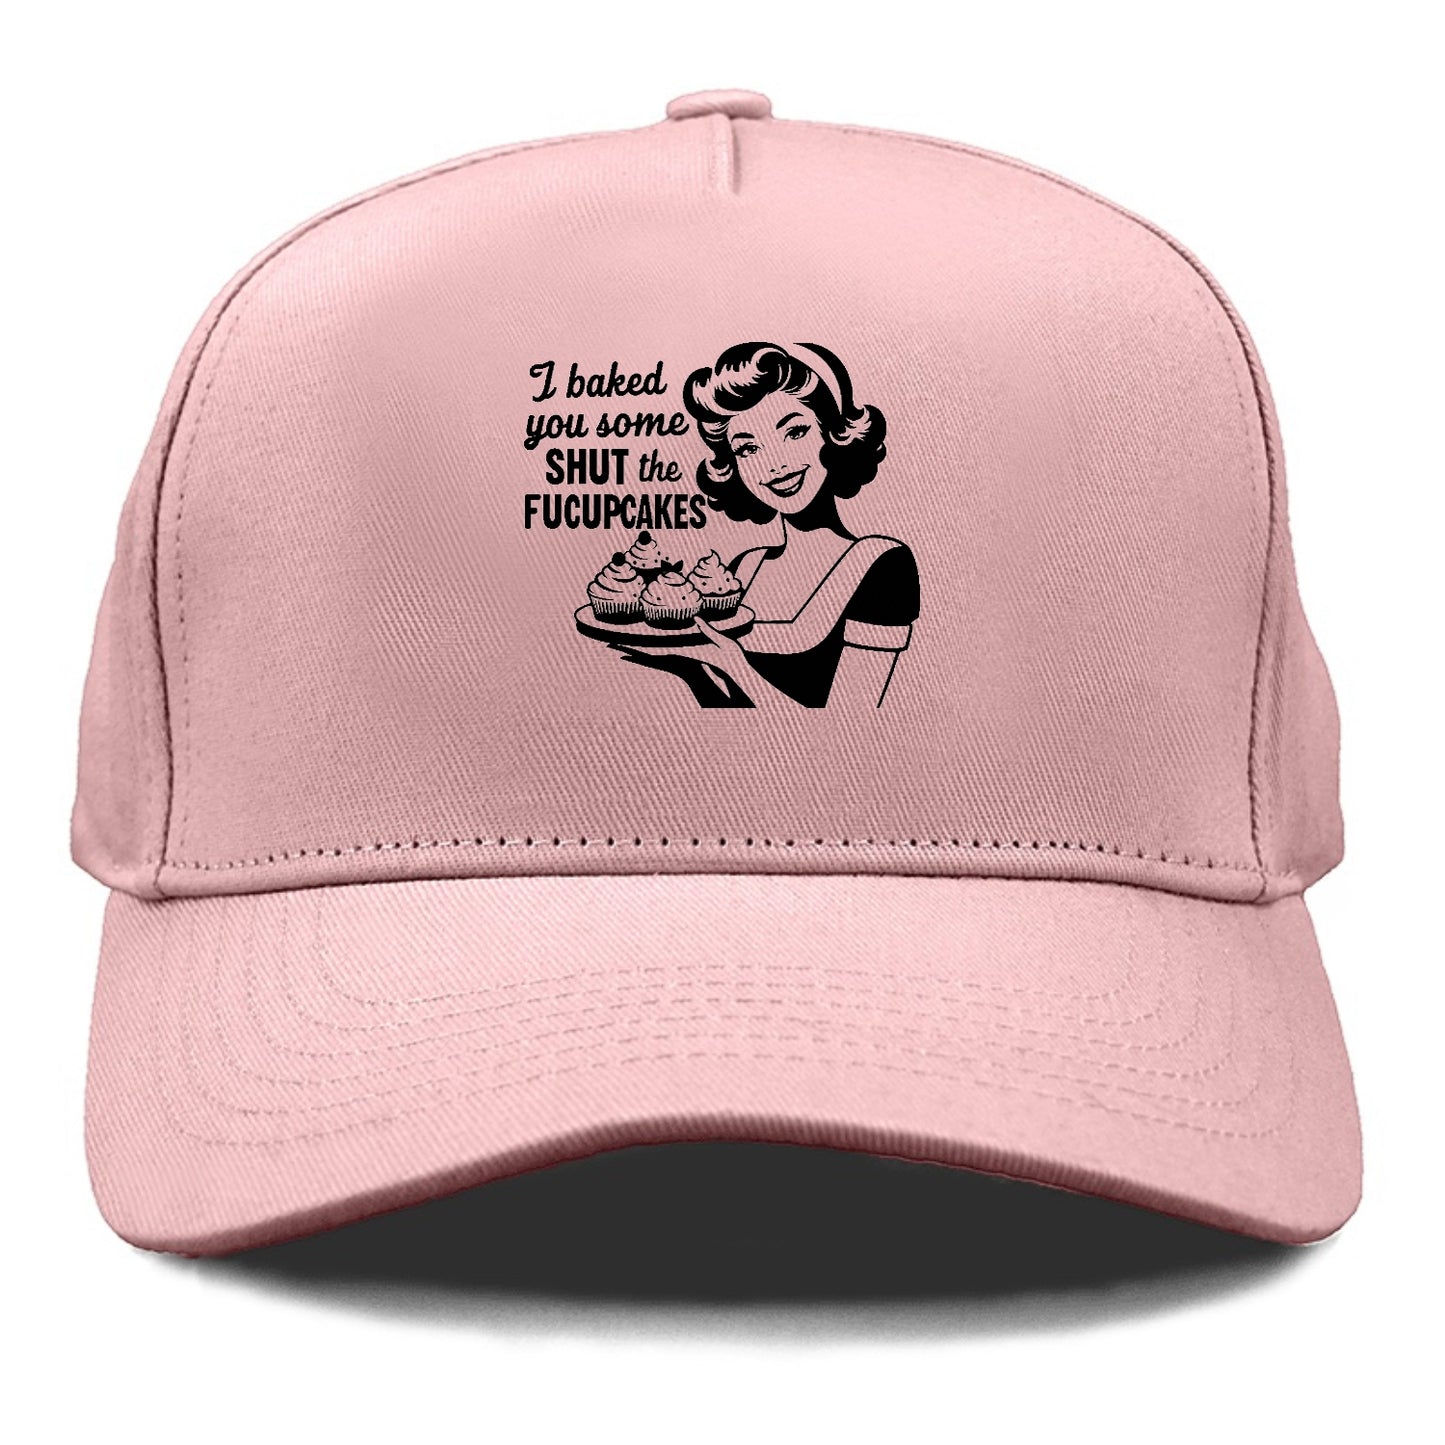 i baked you some shut the fucupcakes!! Hat